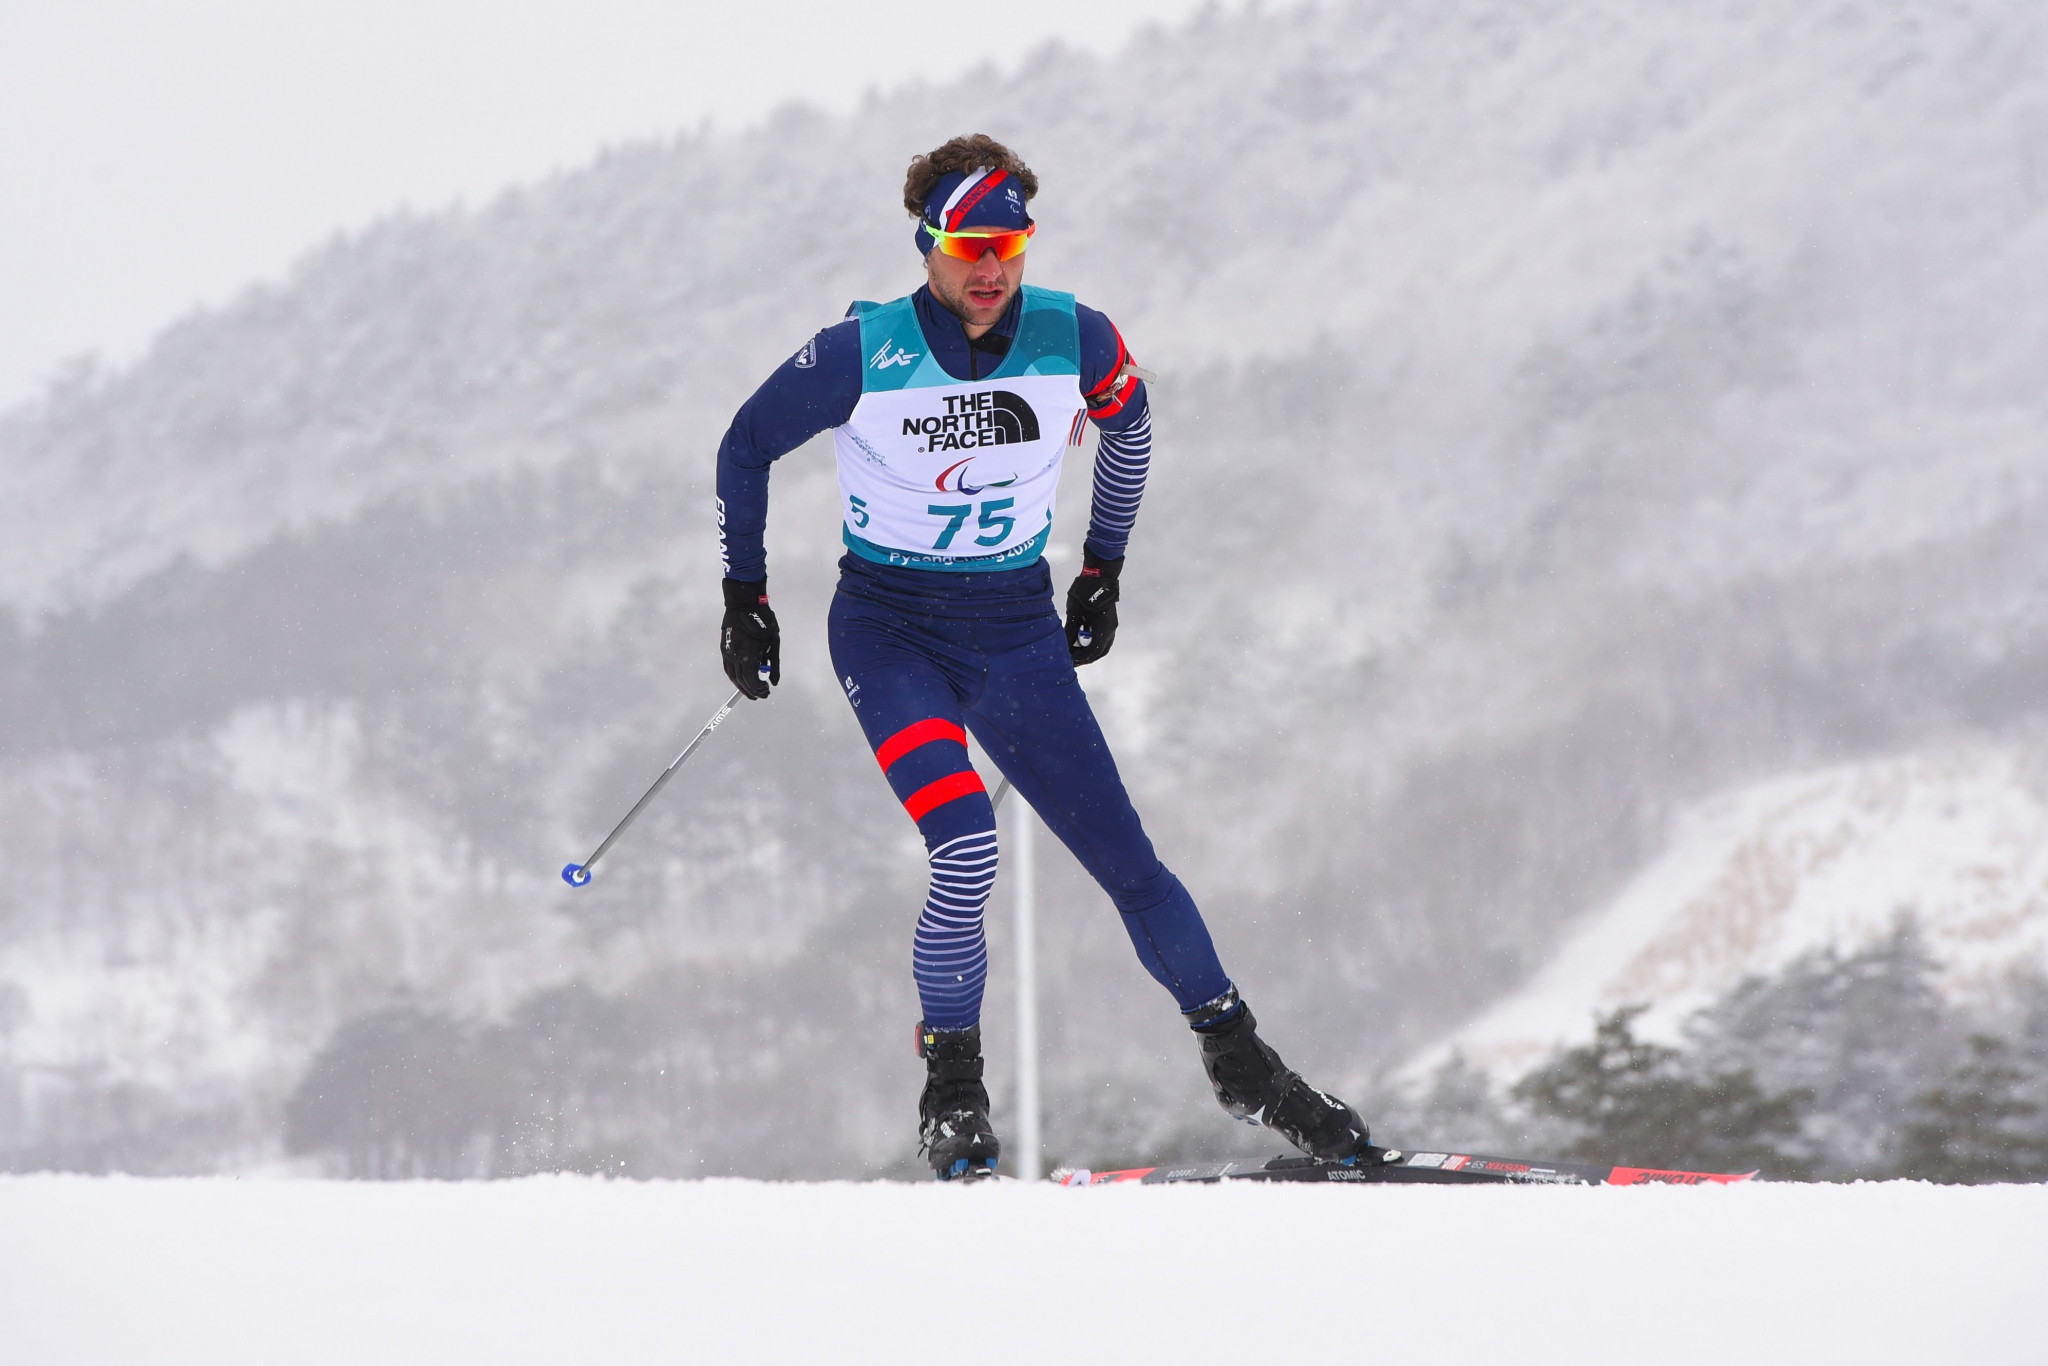 Paralympic champion Daviet clinches third gold of World Para Nordic